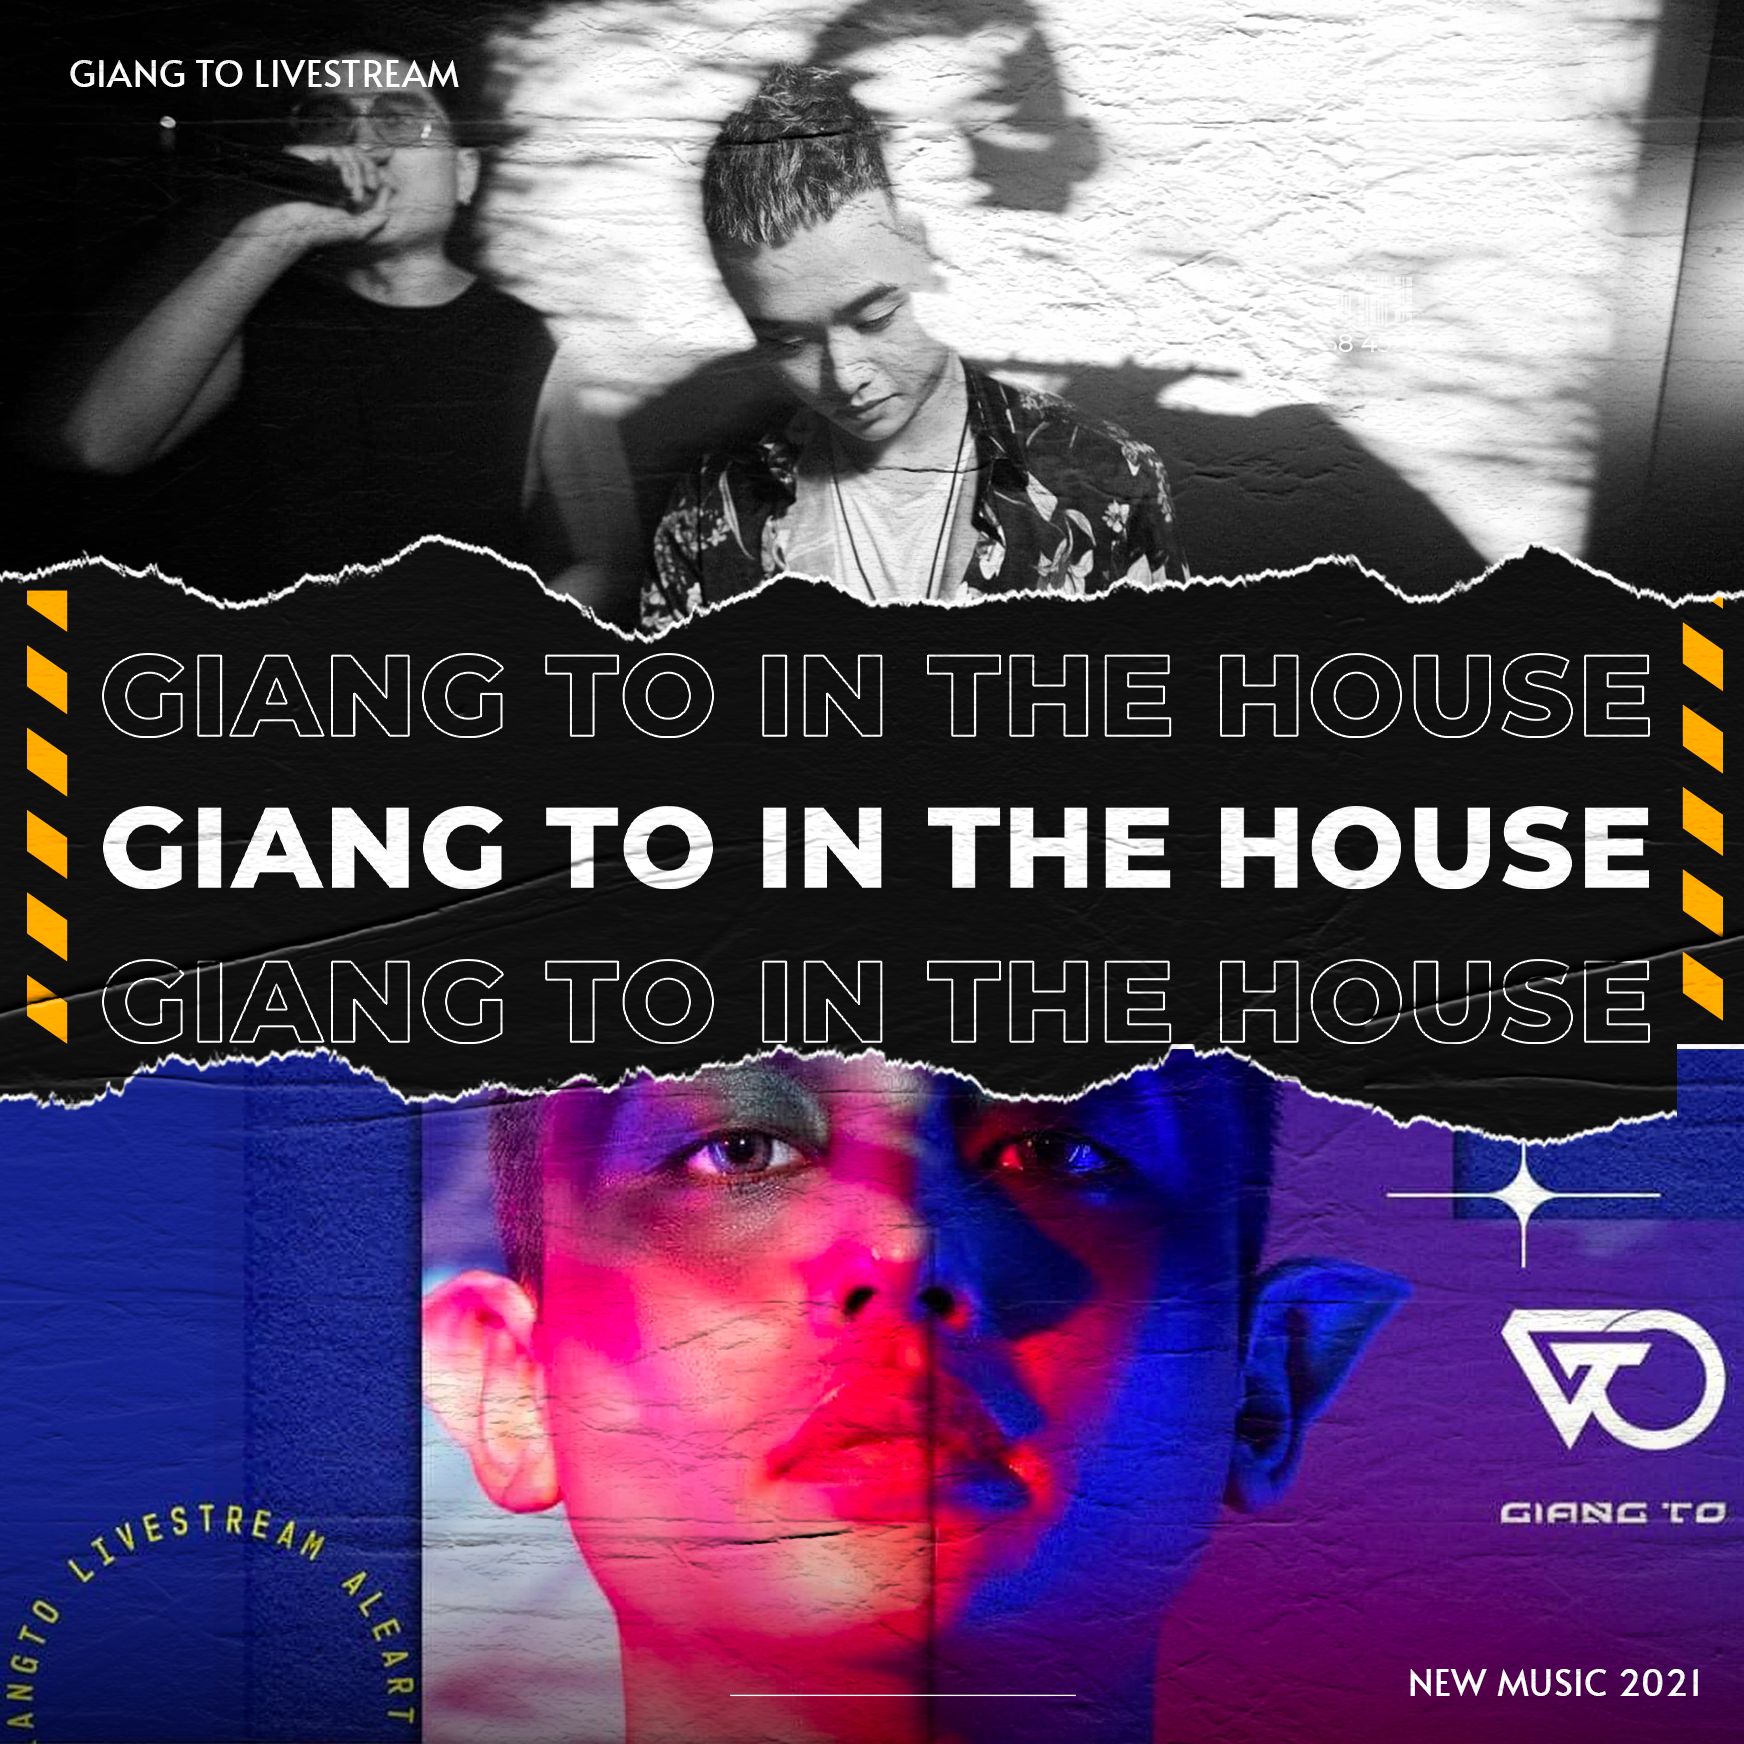 Stiahnuť ▼ Giang To In The House - 2021